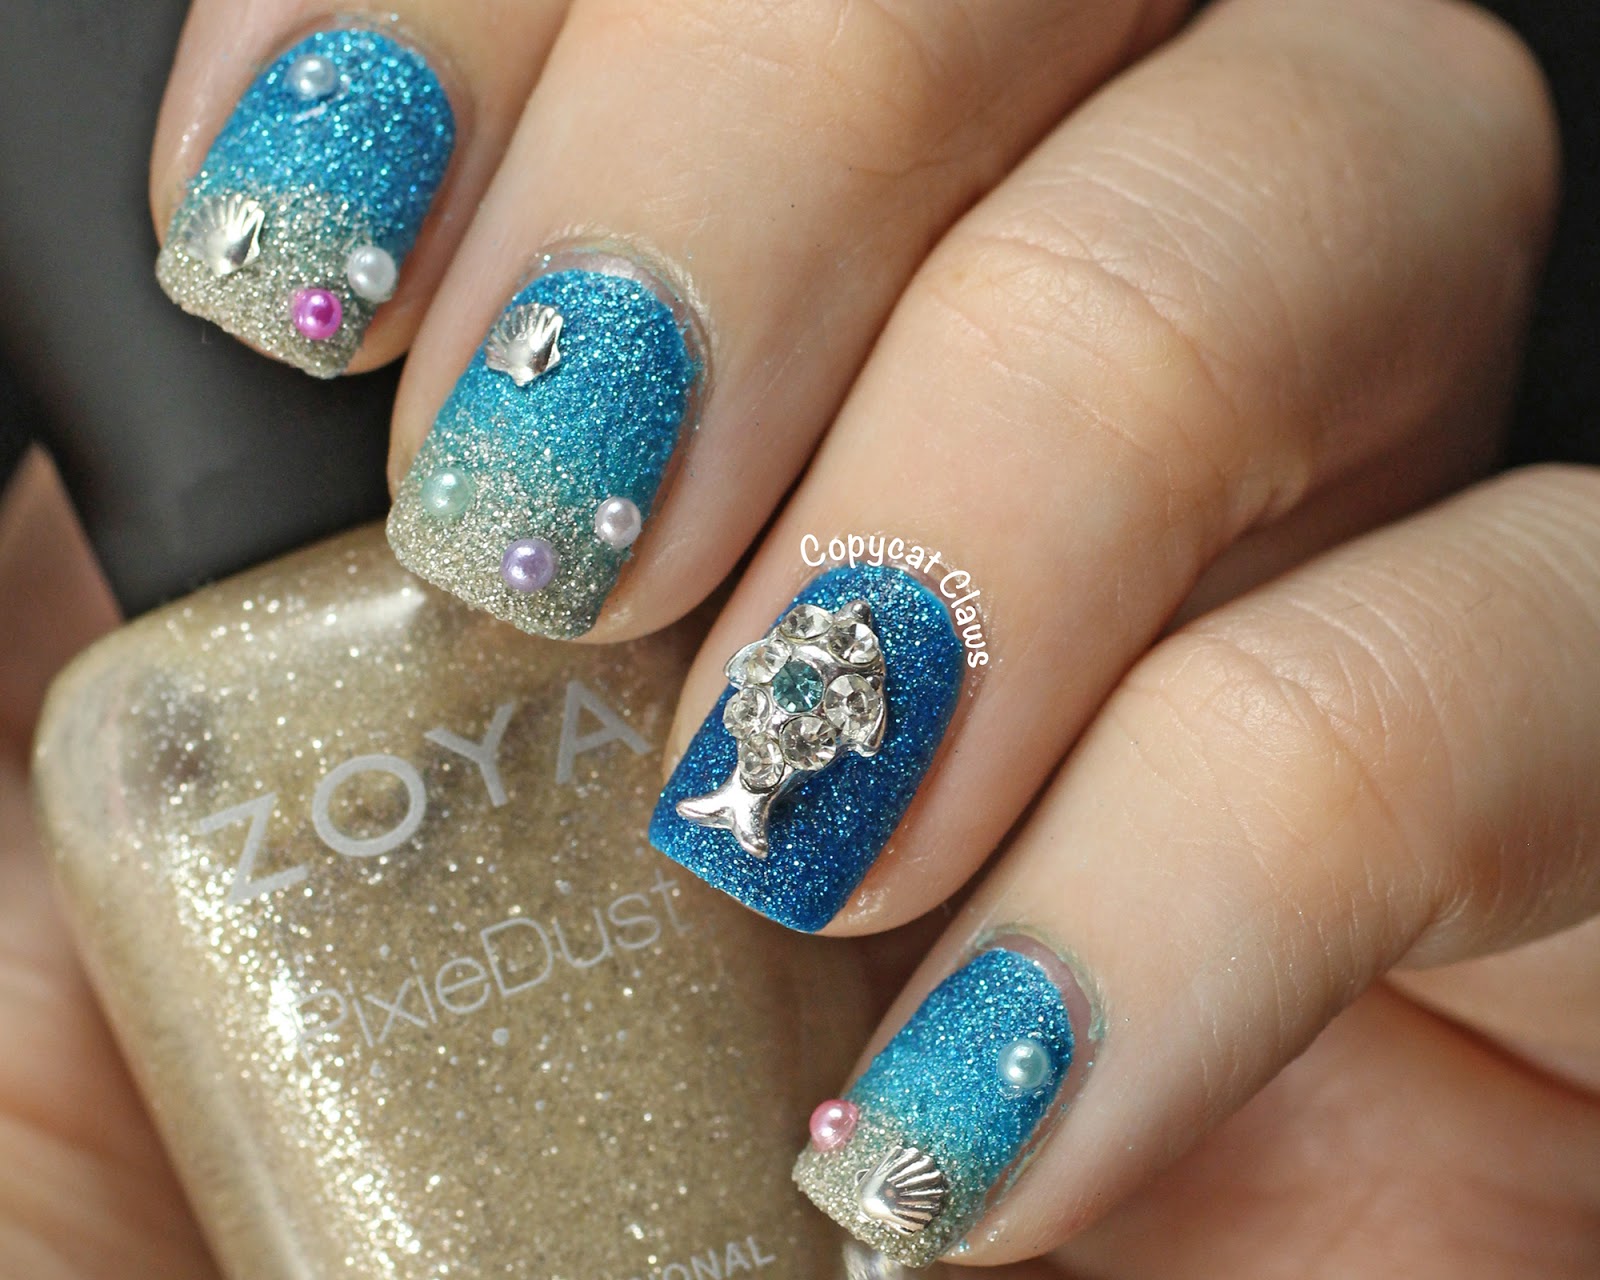 1. Beachy Ombre Nails - wide 7